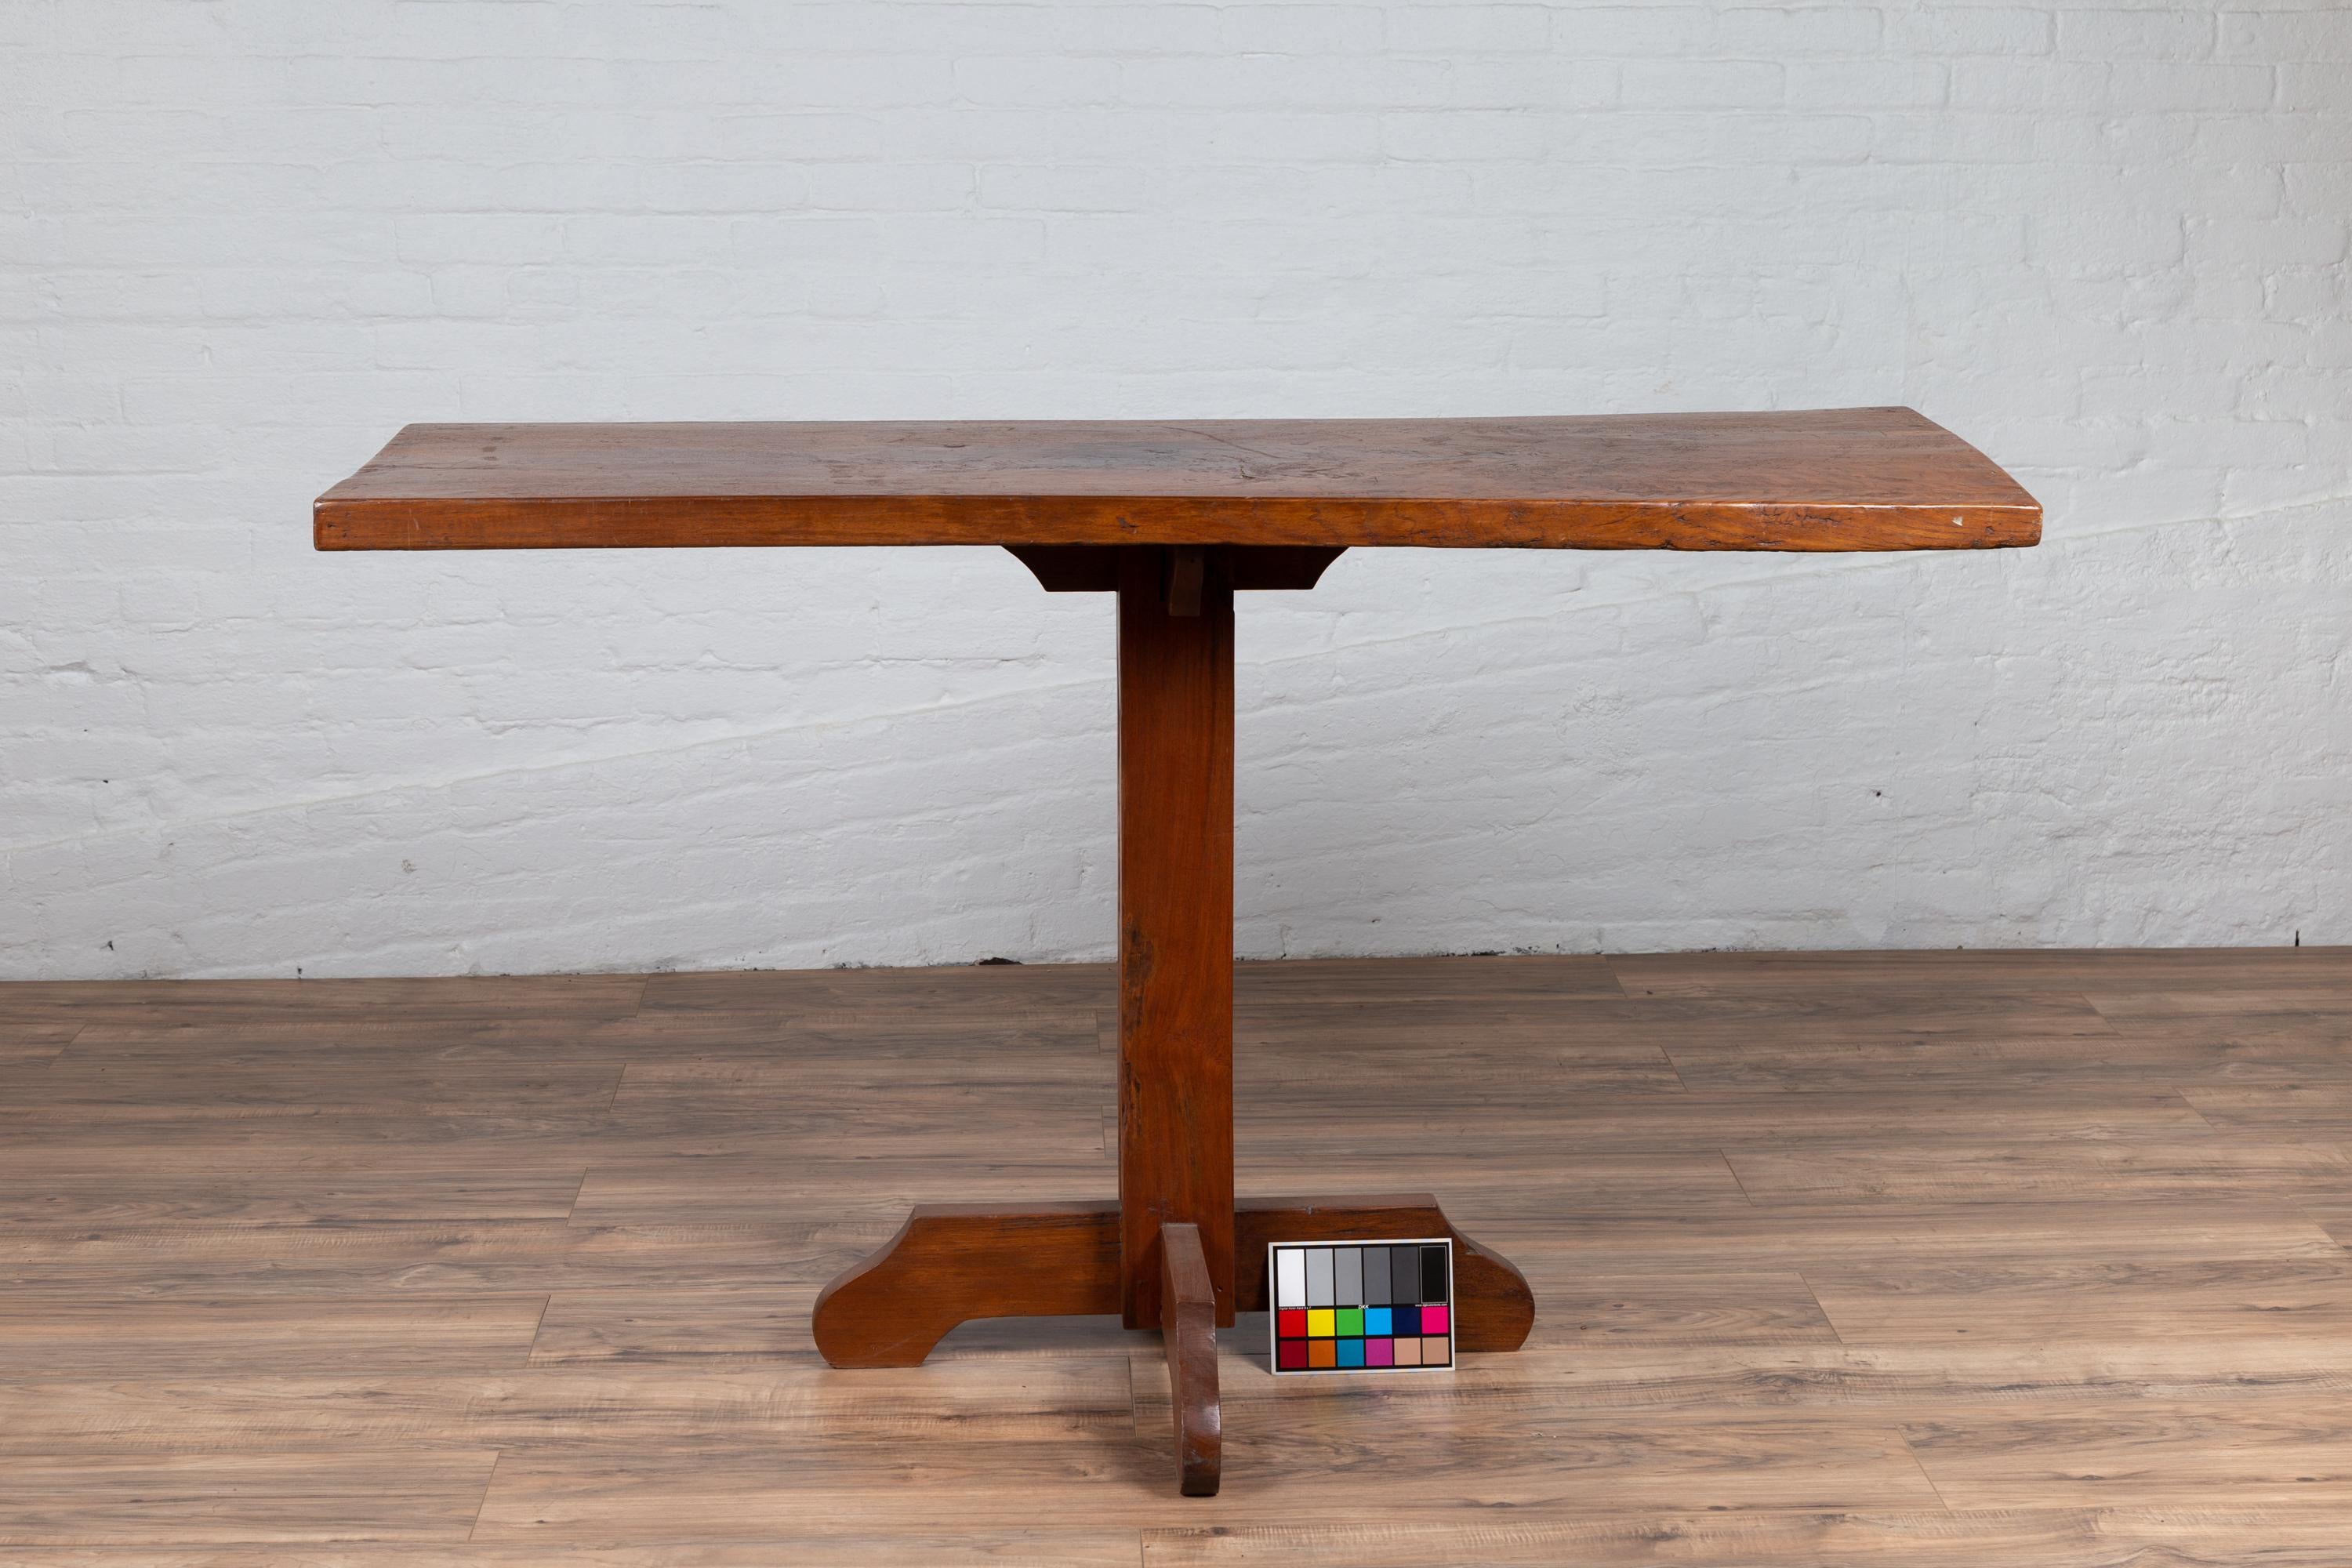 Rustic Indonesian Wooden Console Table with Single Plank Top and Pedestal Base For Sale 8